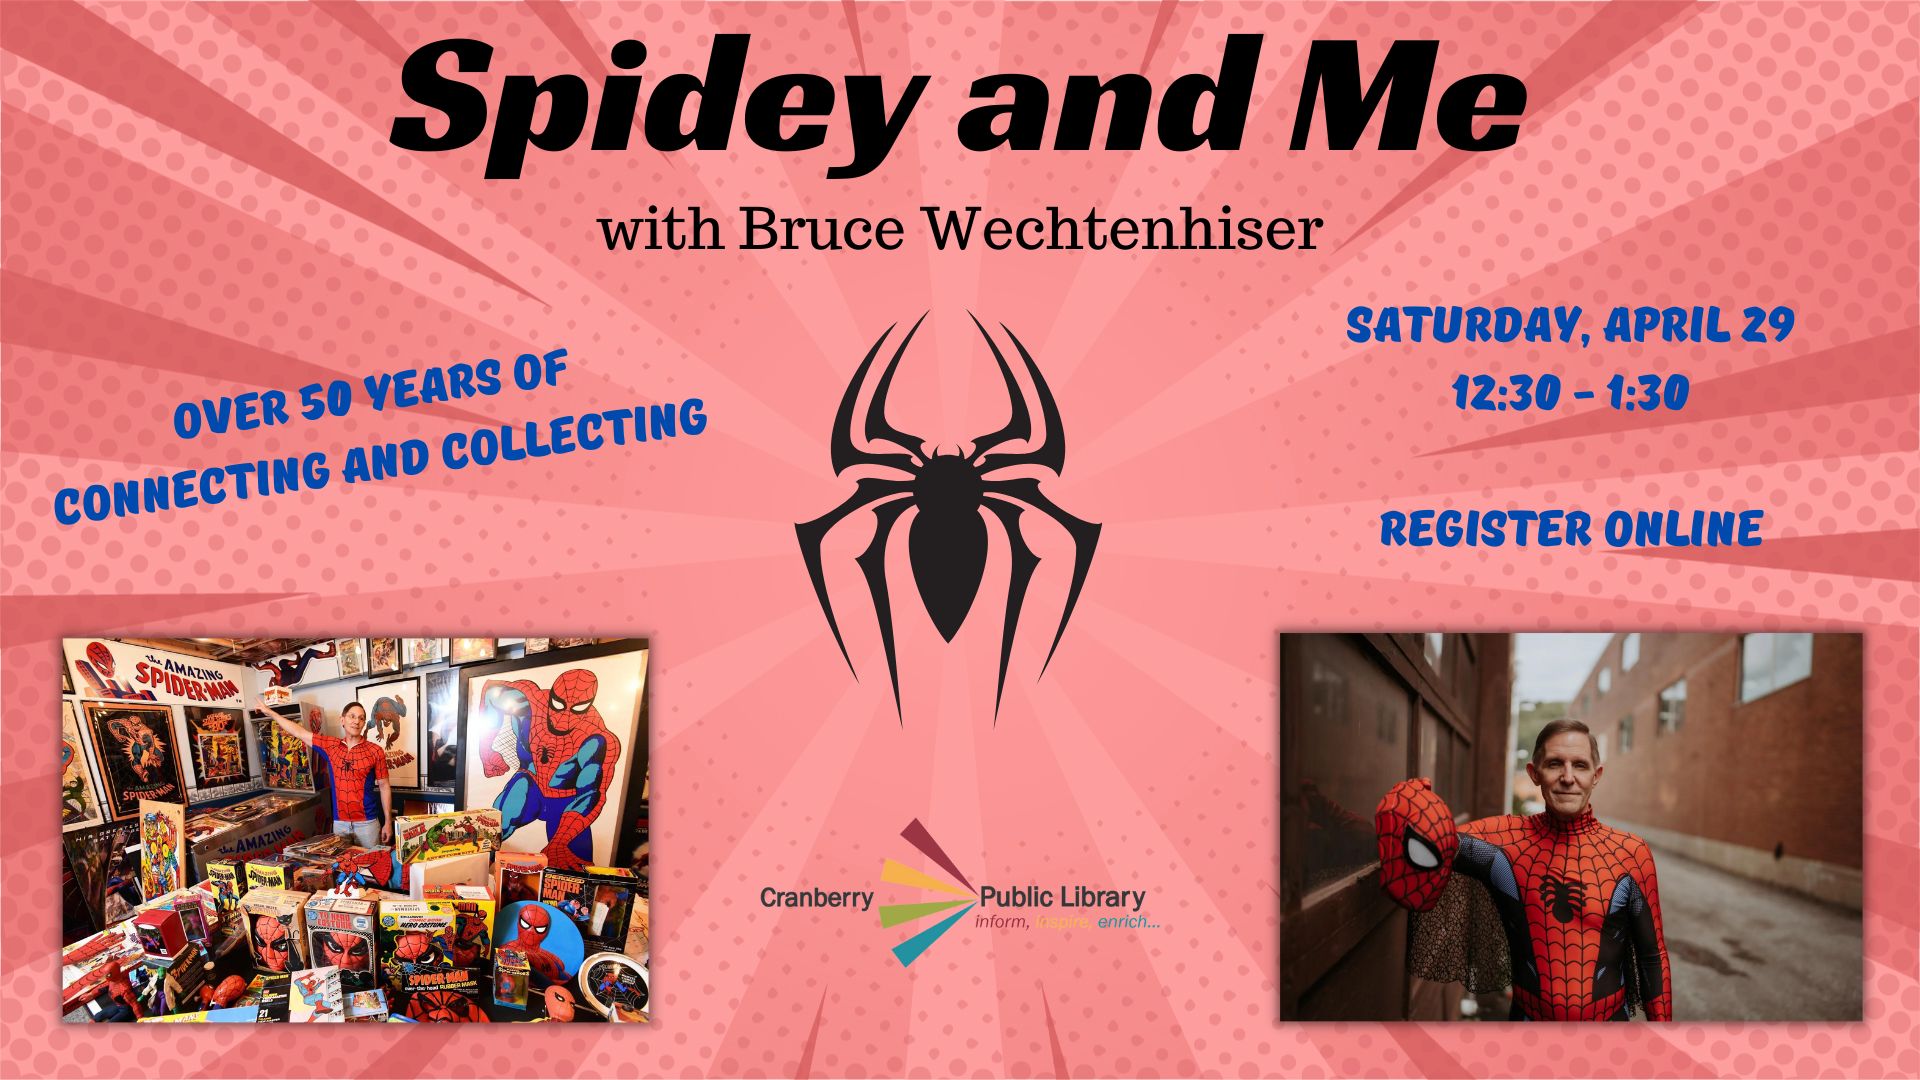 Flyer for Spidey and Me presentation with photos of Bruce Wechtenhiser with his Spider-Man collection 